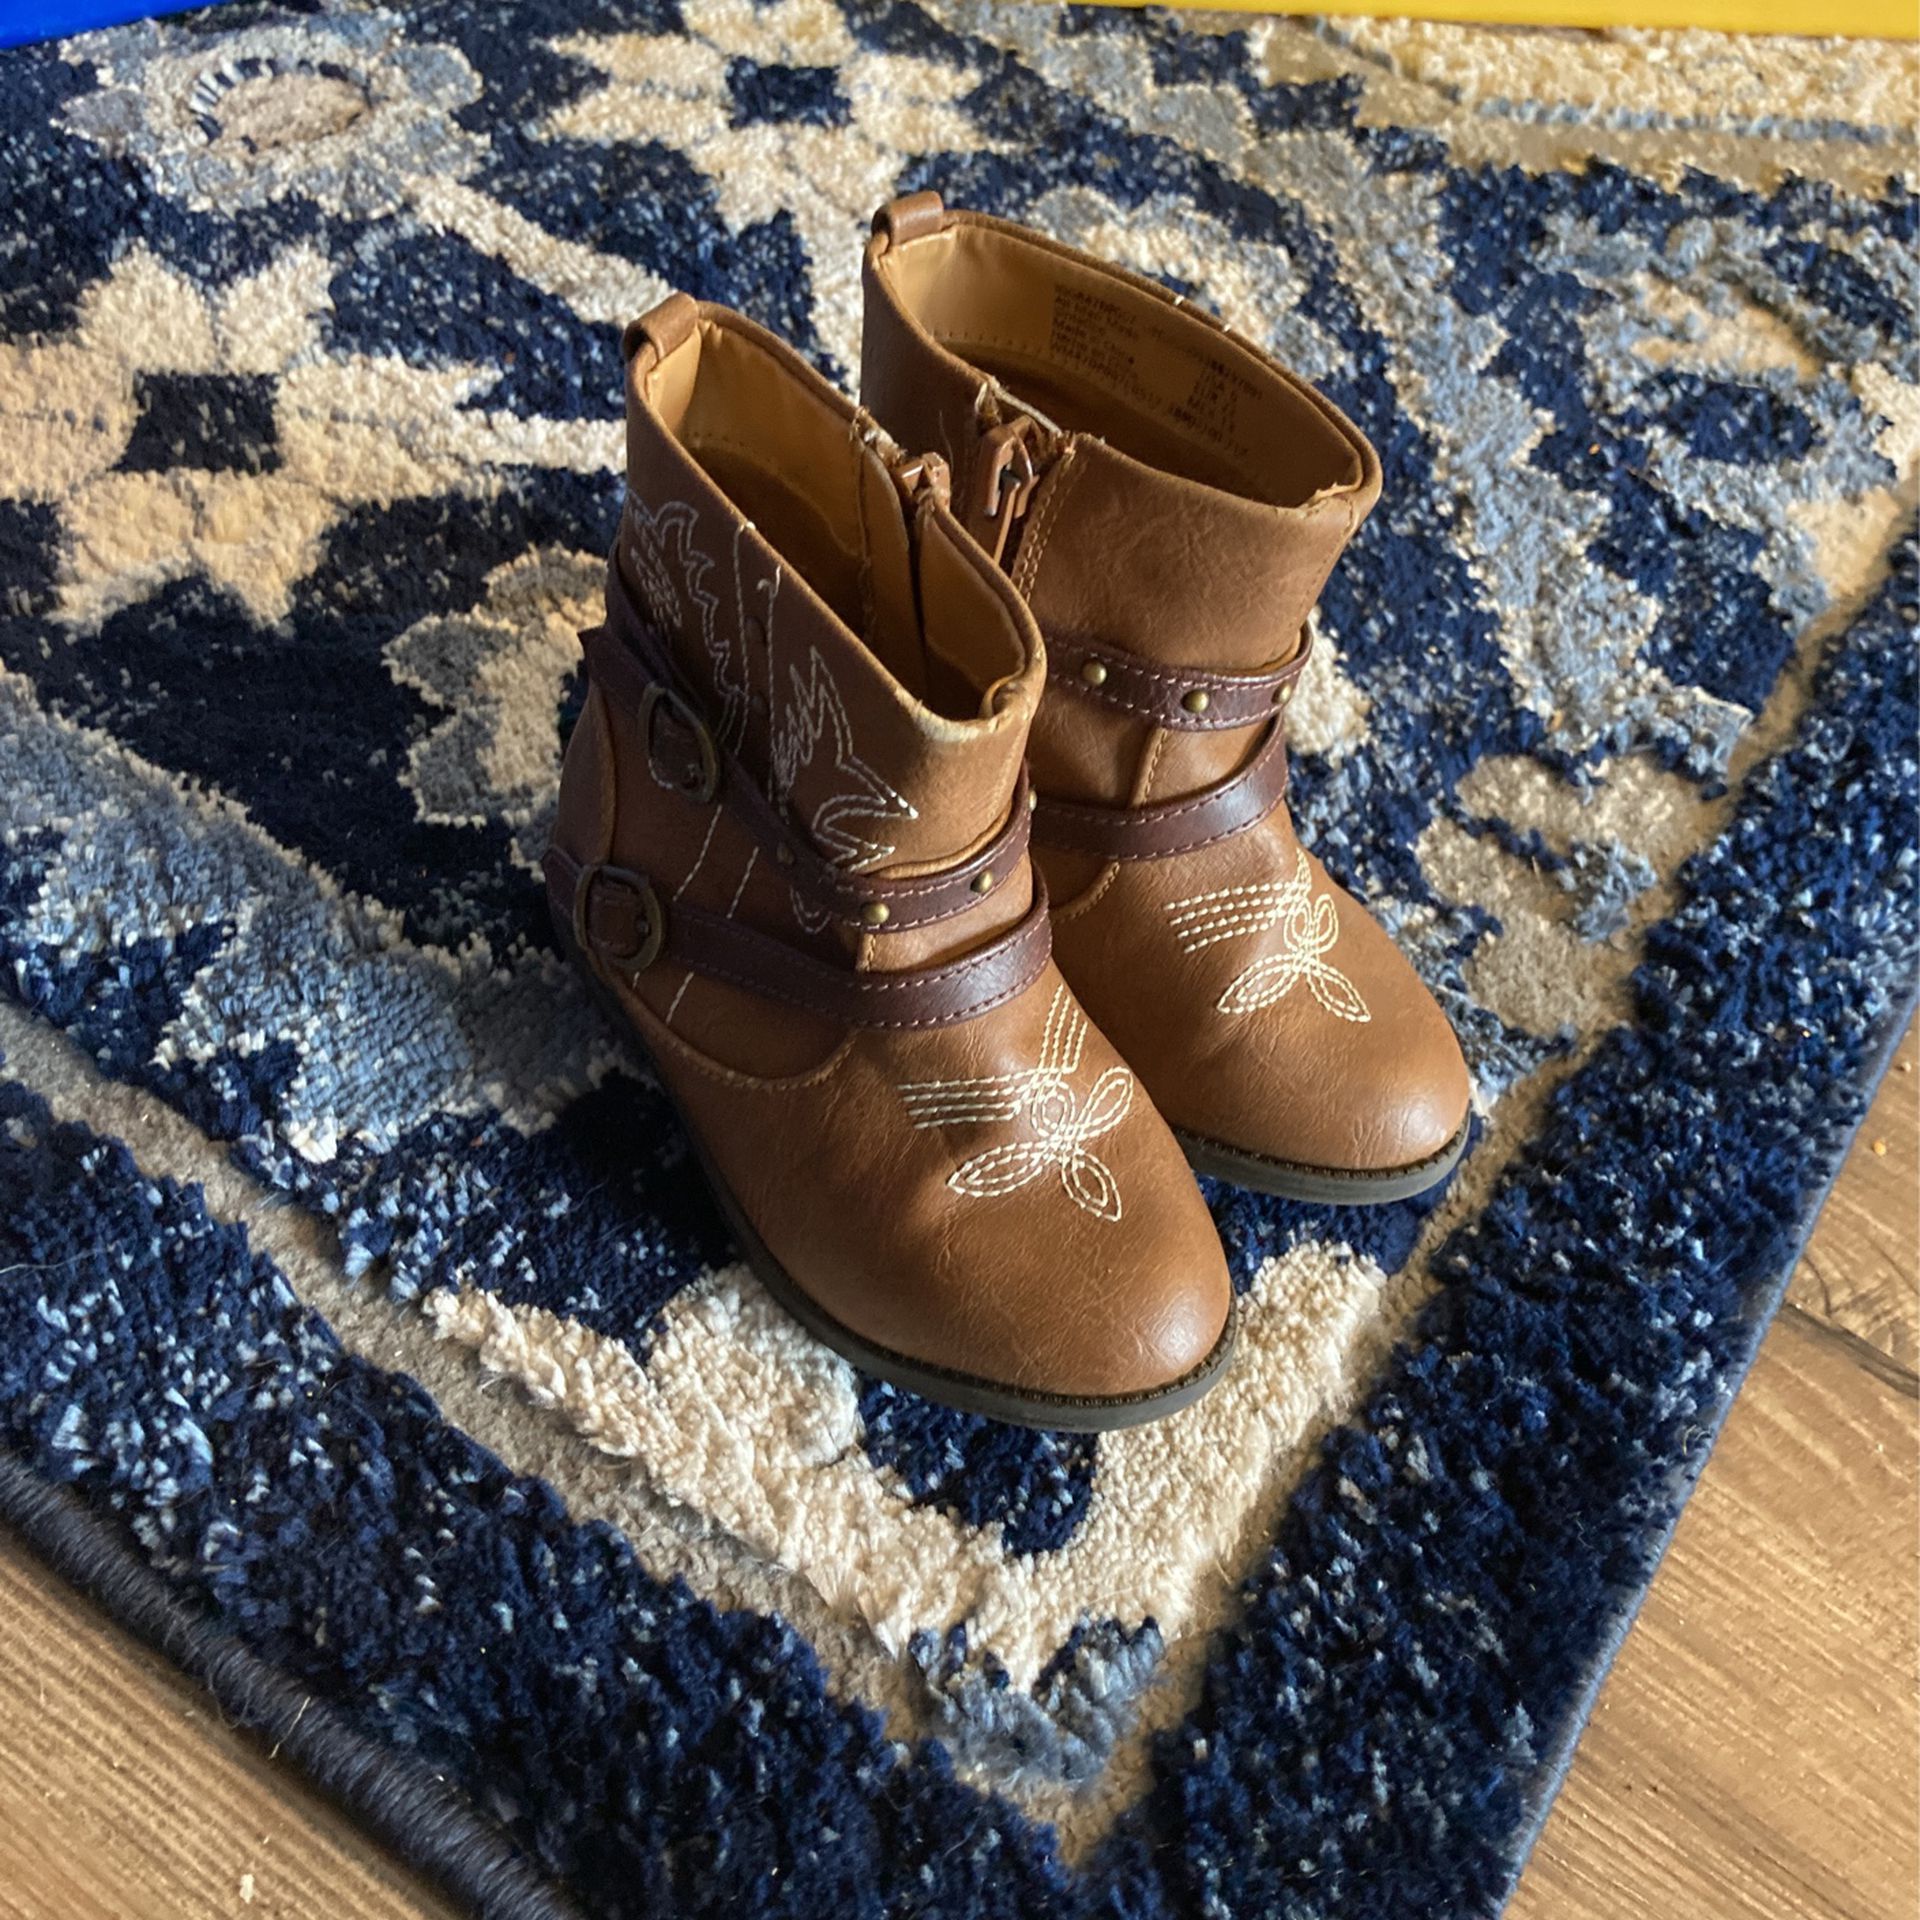 Size 6 Toddler Boots